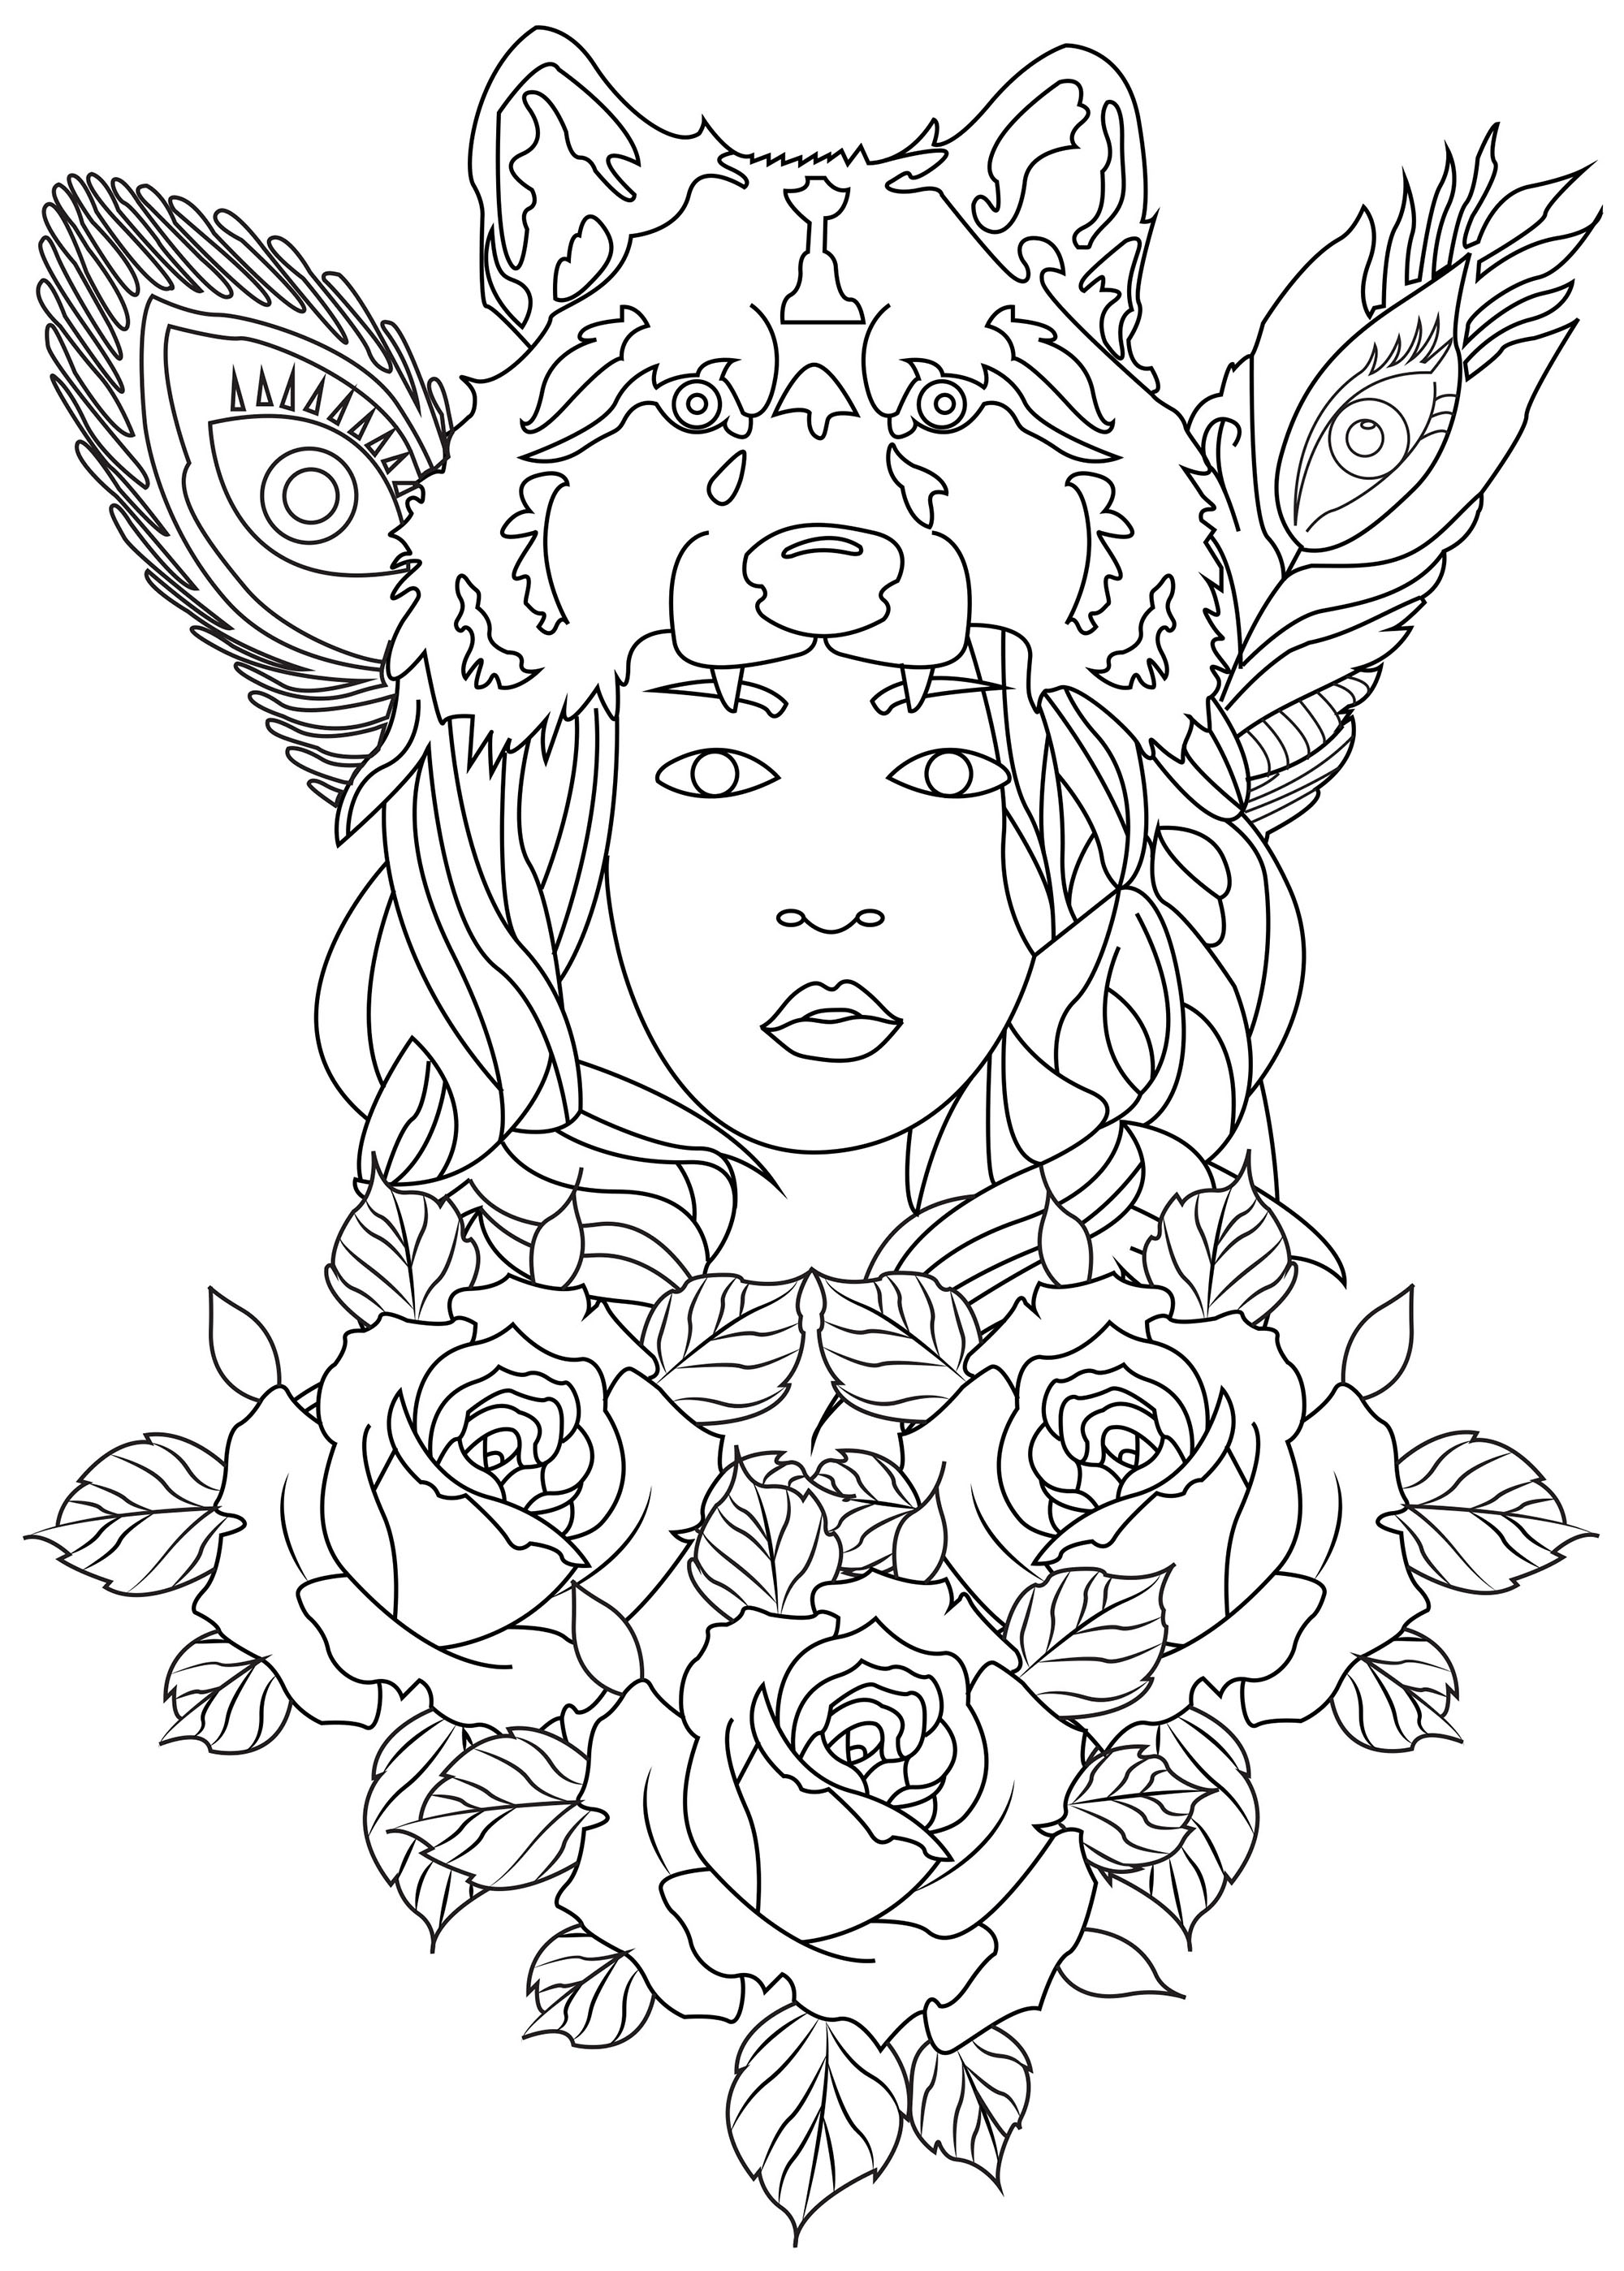 Color this 'Wolf Woman' and all the roses and feathers that surround her, Artist : Caillou